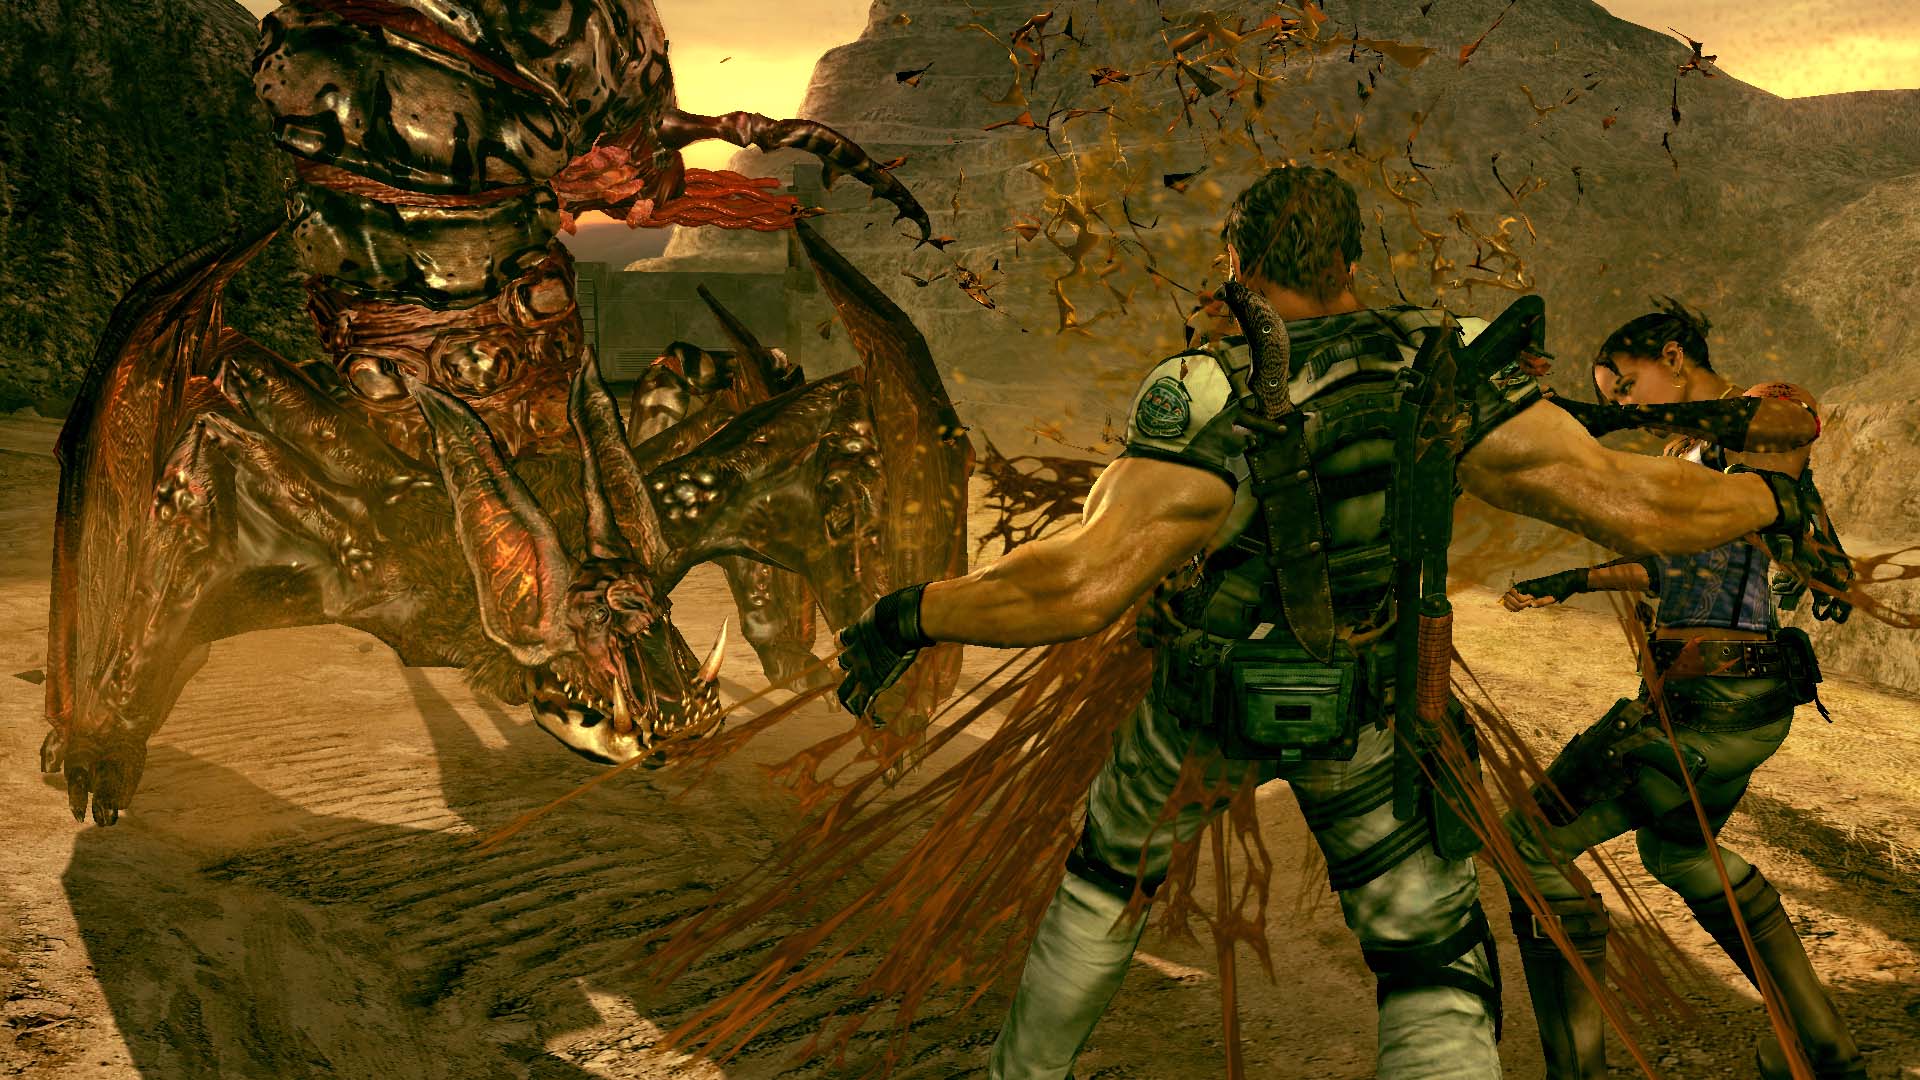 Resident Evil 5 Review: Visually-stunning and explosive